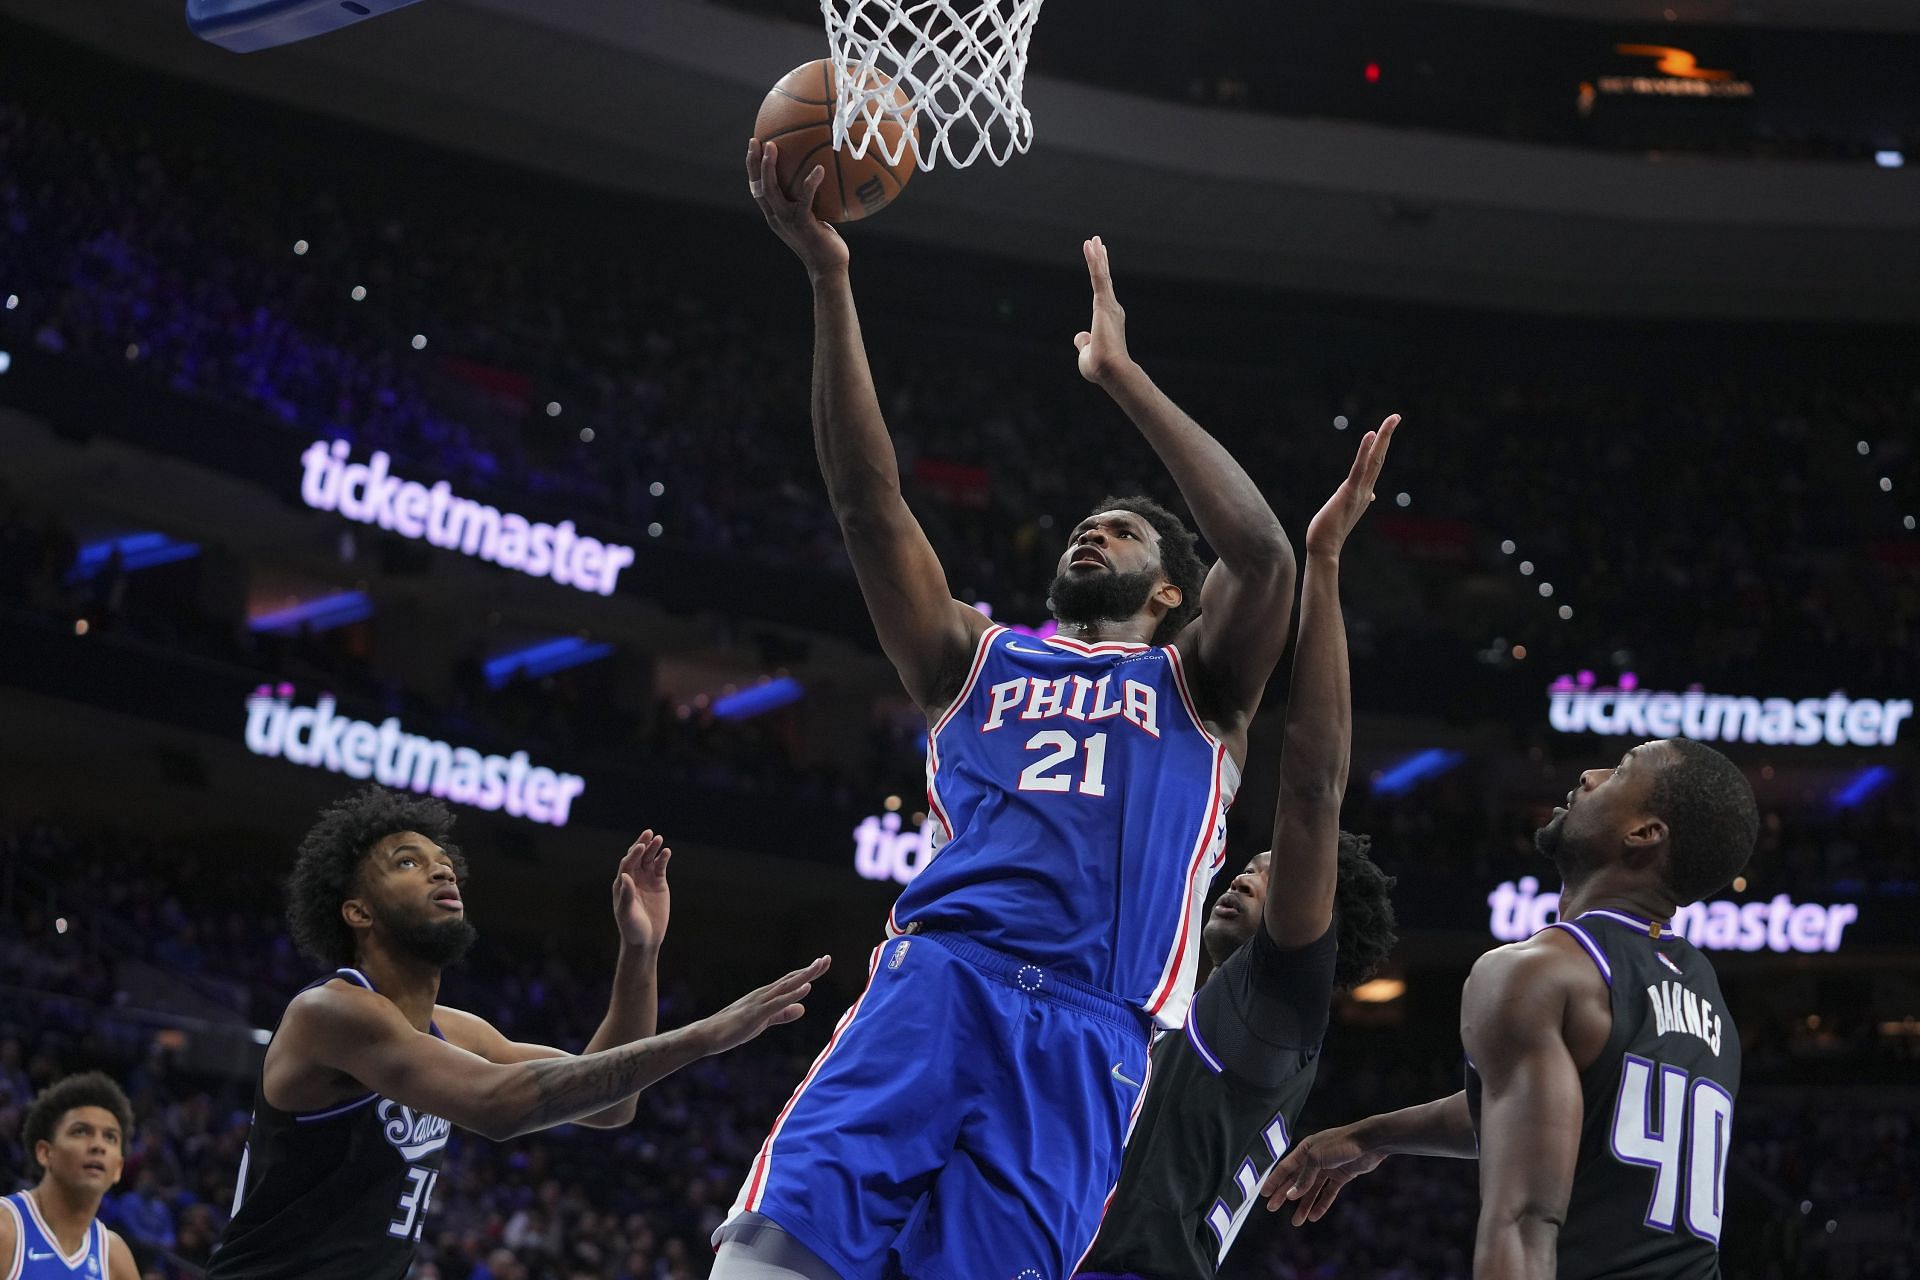 Philadelphia 76ers All-Star Joel Embiid going up for a layup